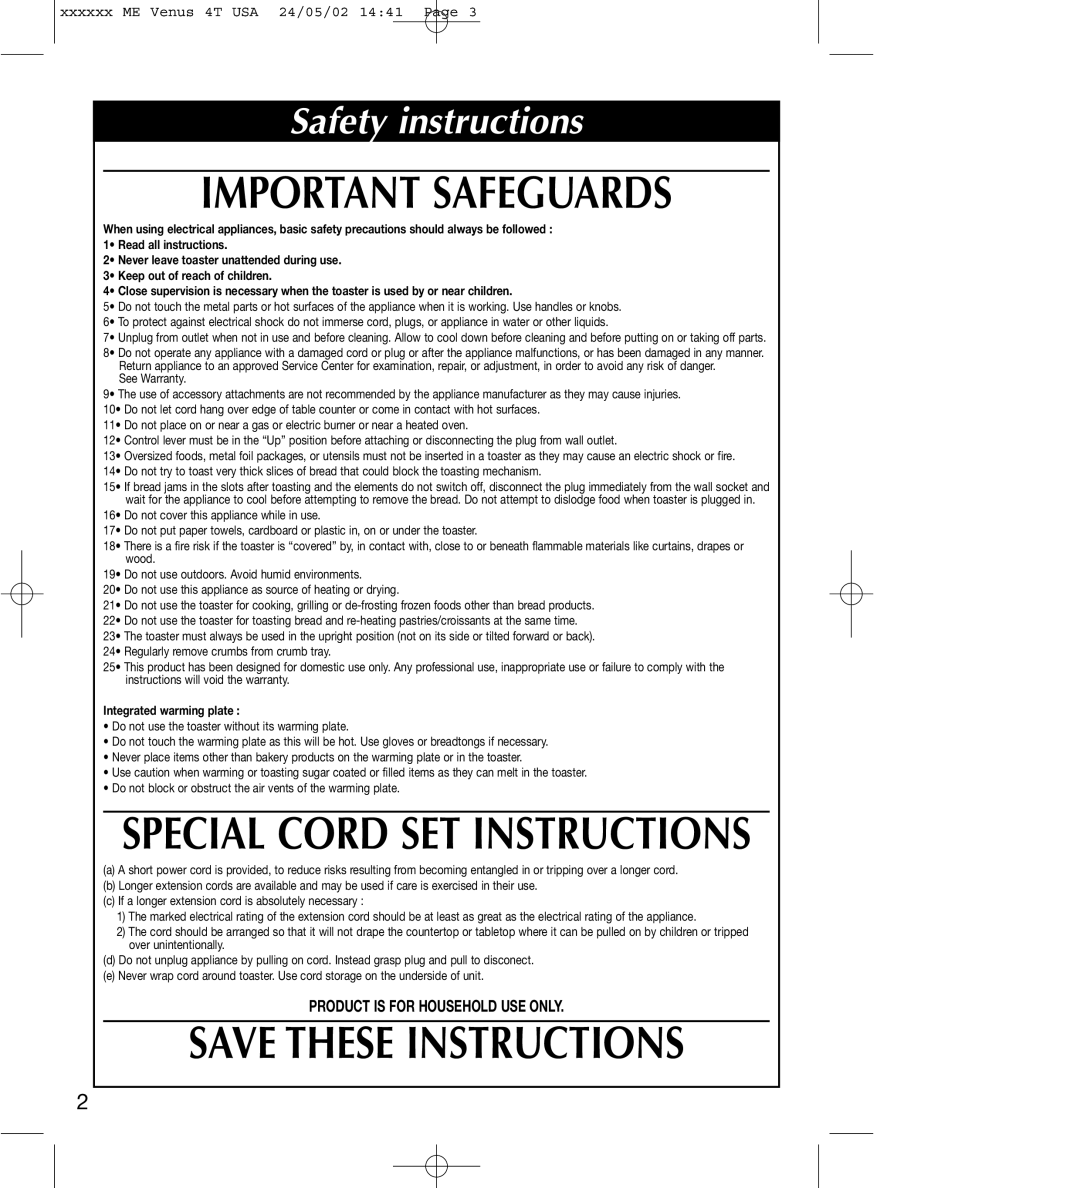 Rowenta TO 91, TO 90 Important Safeguards, Save These Instructions, Special Cord Set Instructions, Safety instructions 